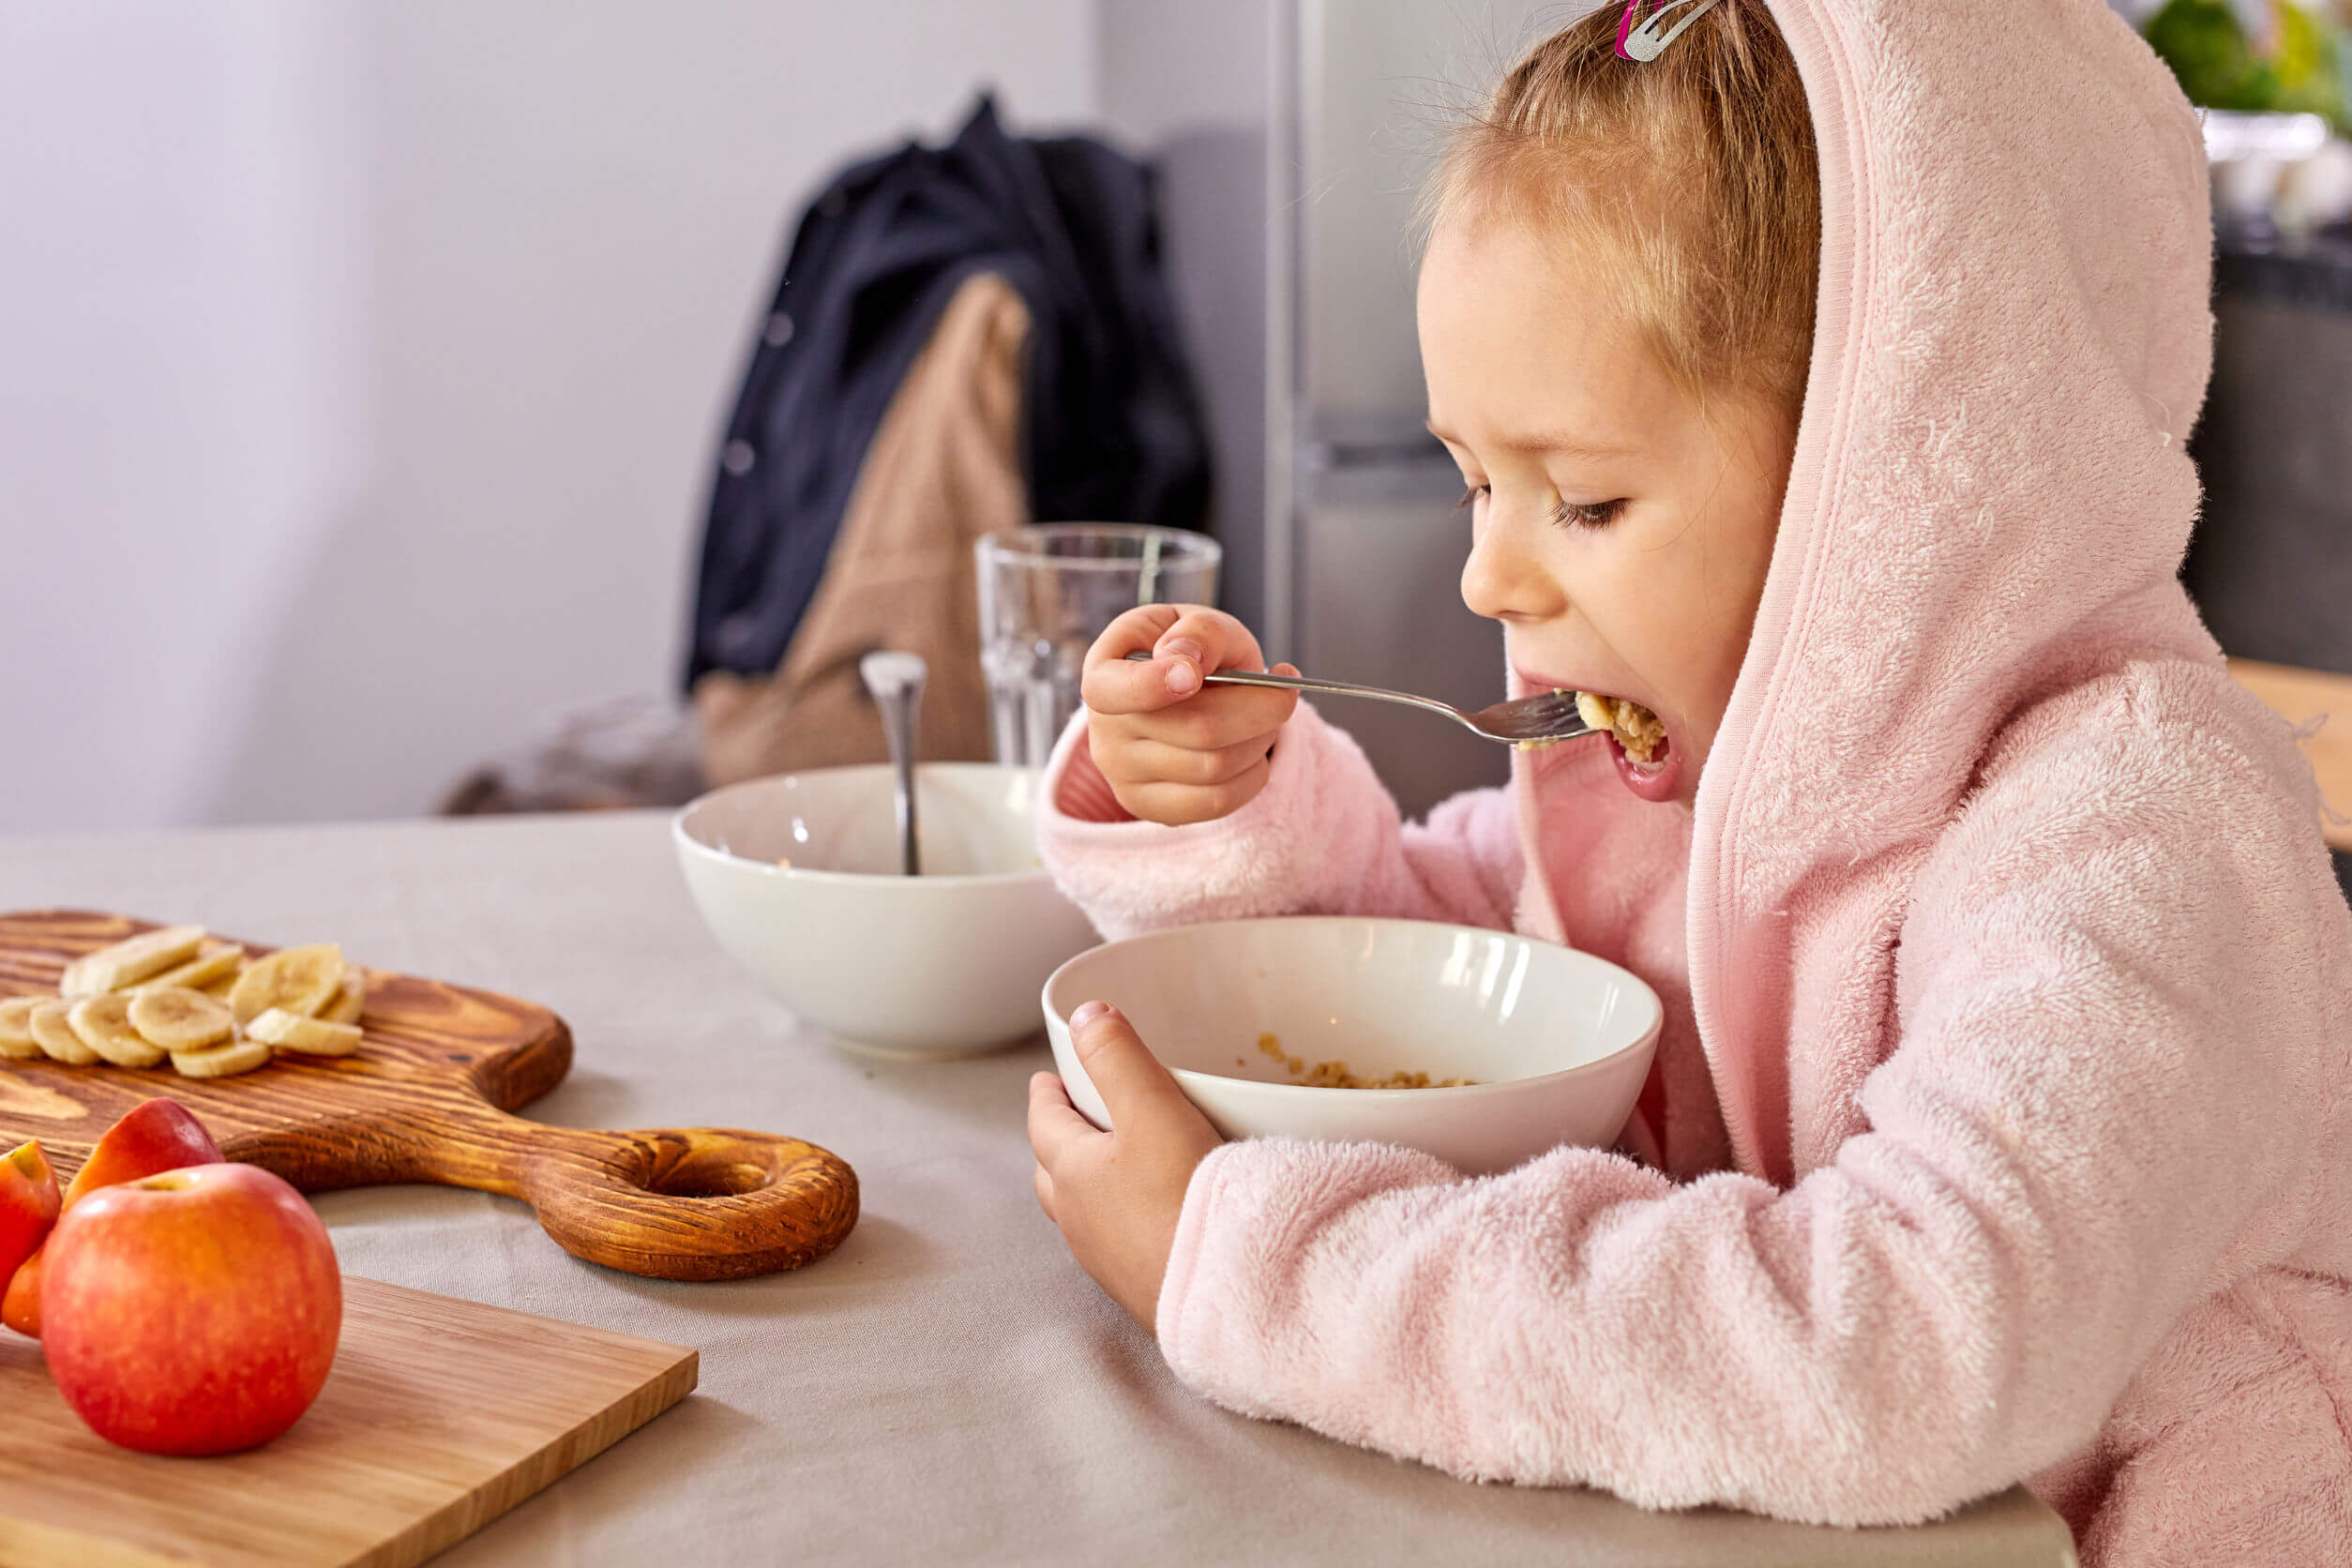 A little girl eating oatmeal and fruit for snack.